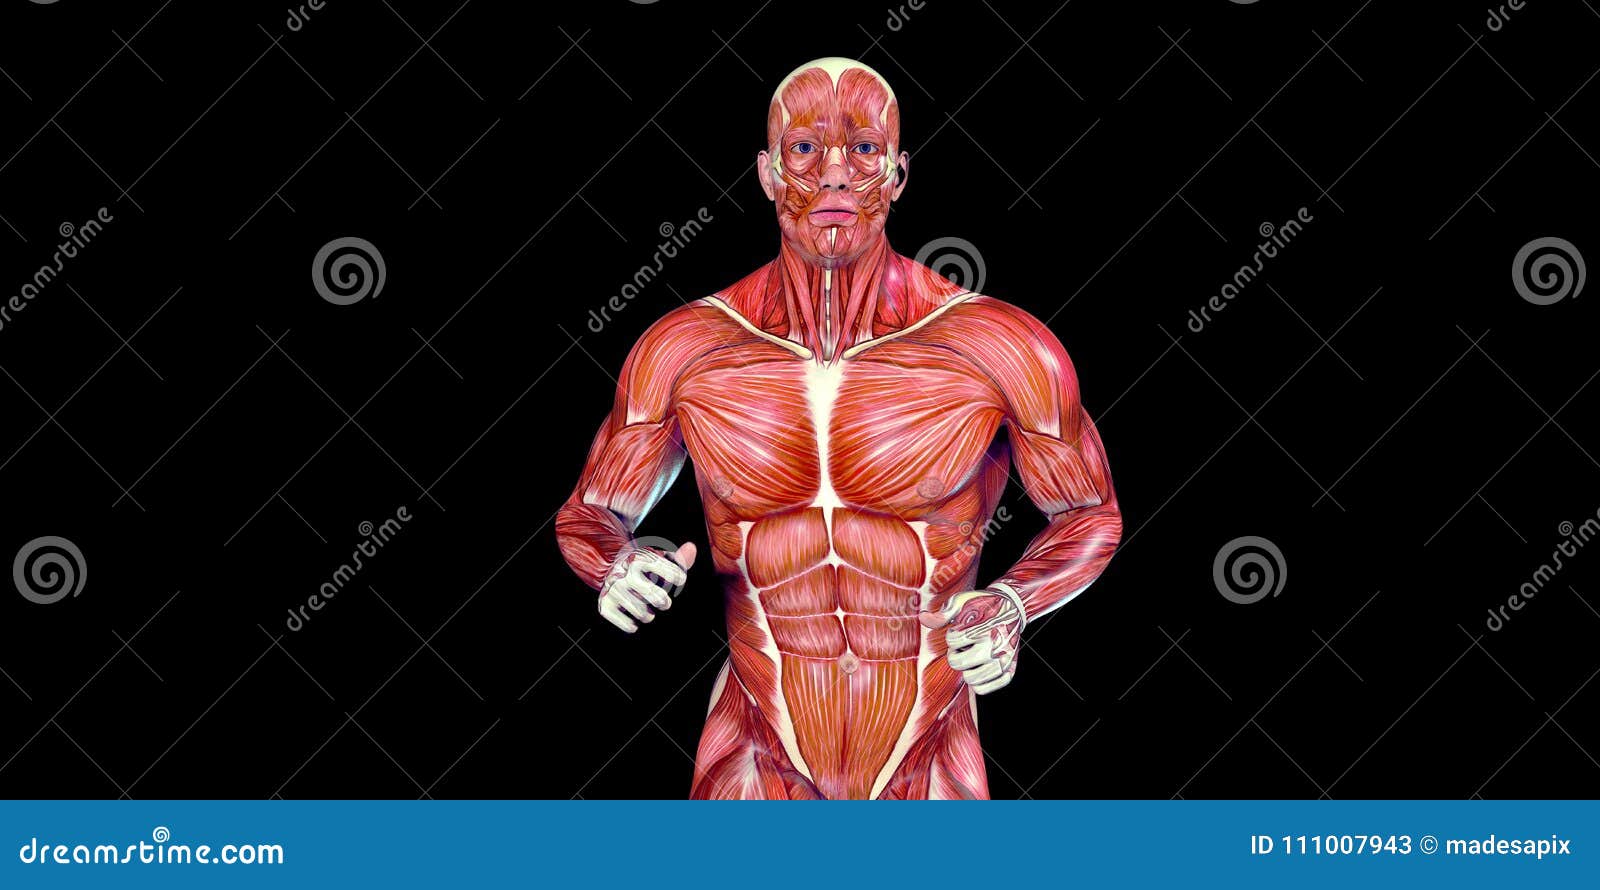 Human Male Body Anatomy Illustration Of A Human Torso With Visible Muscles Stock Illustration Illustration Of Anatomical Biology 111007943